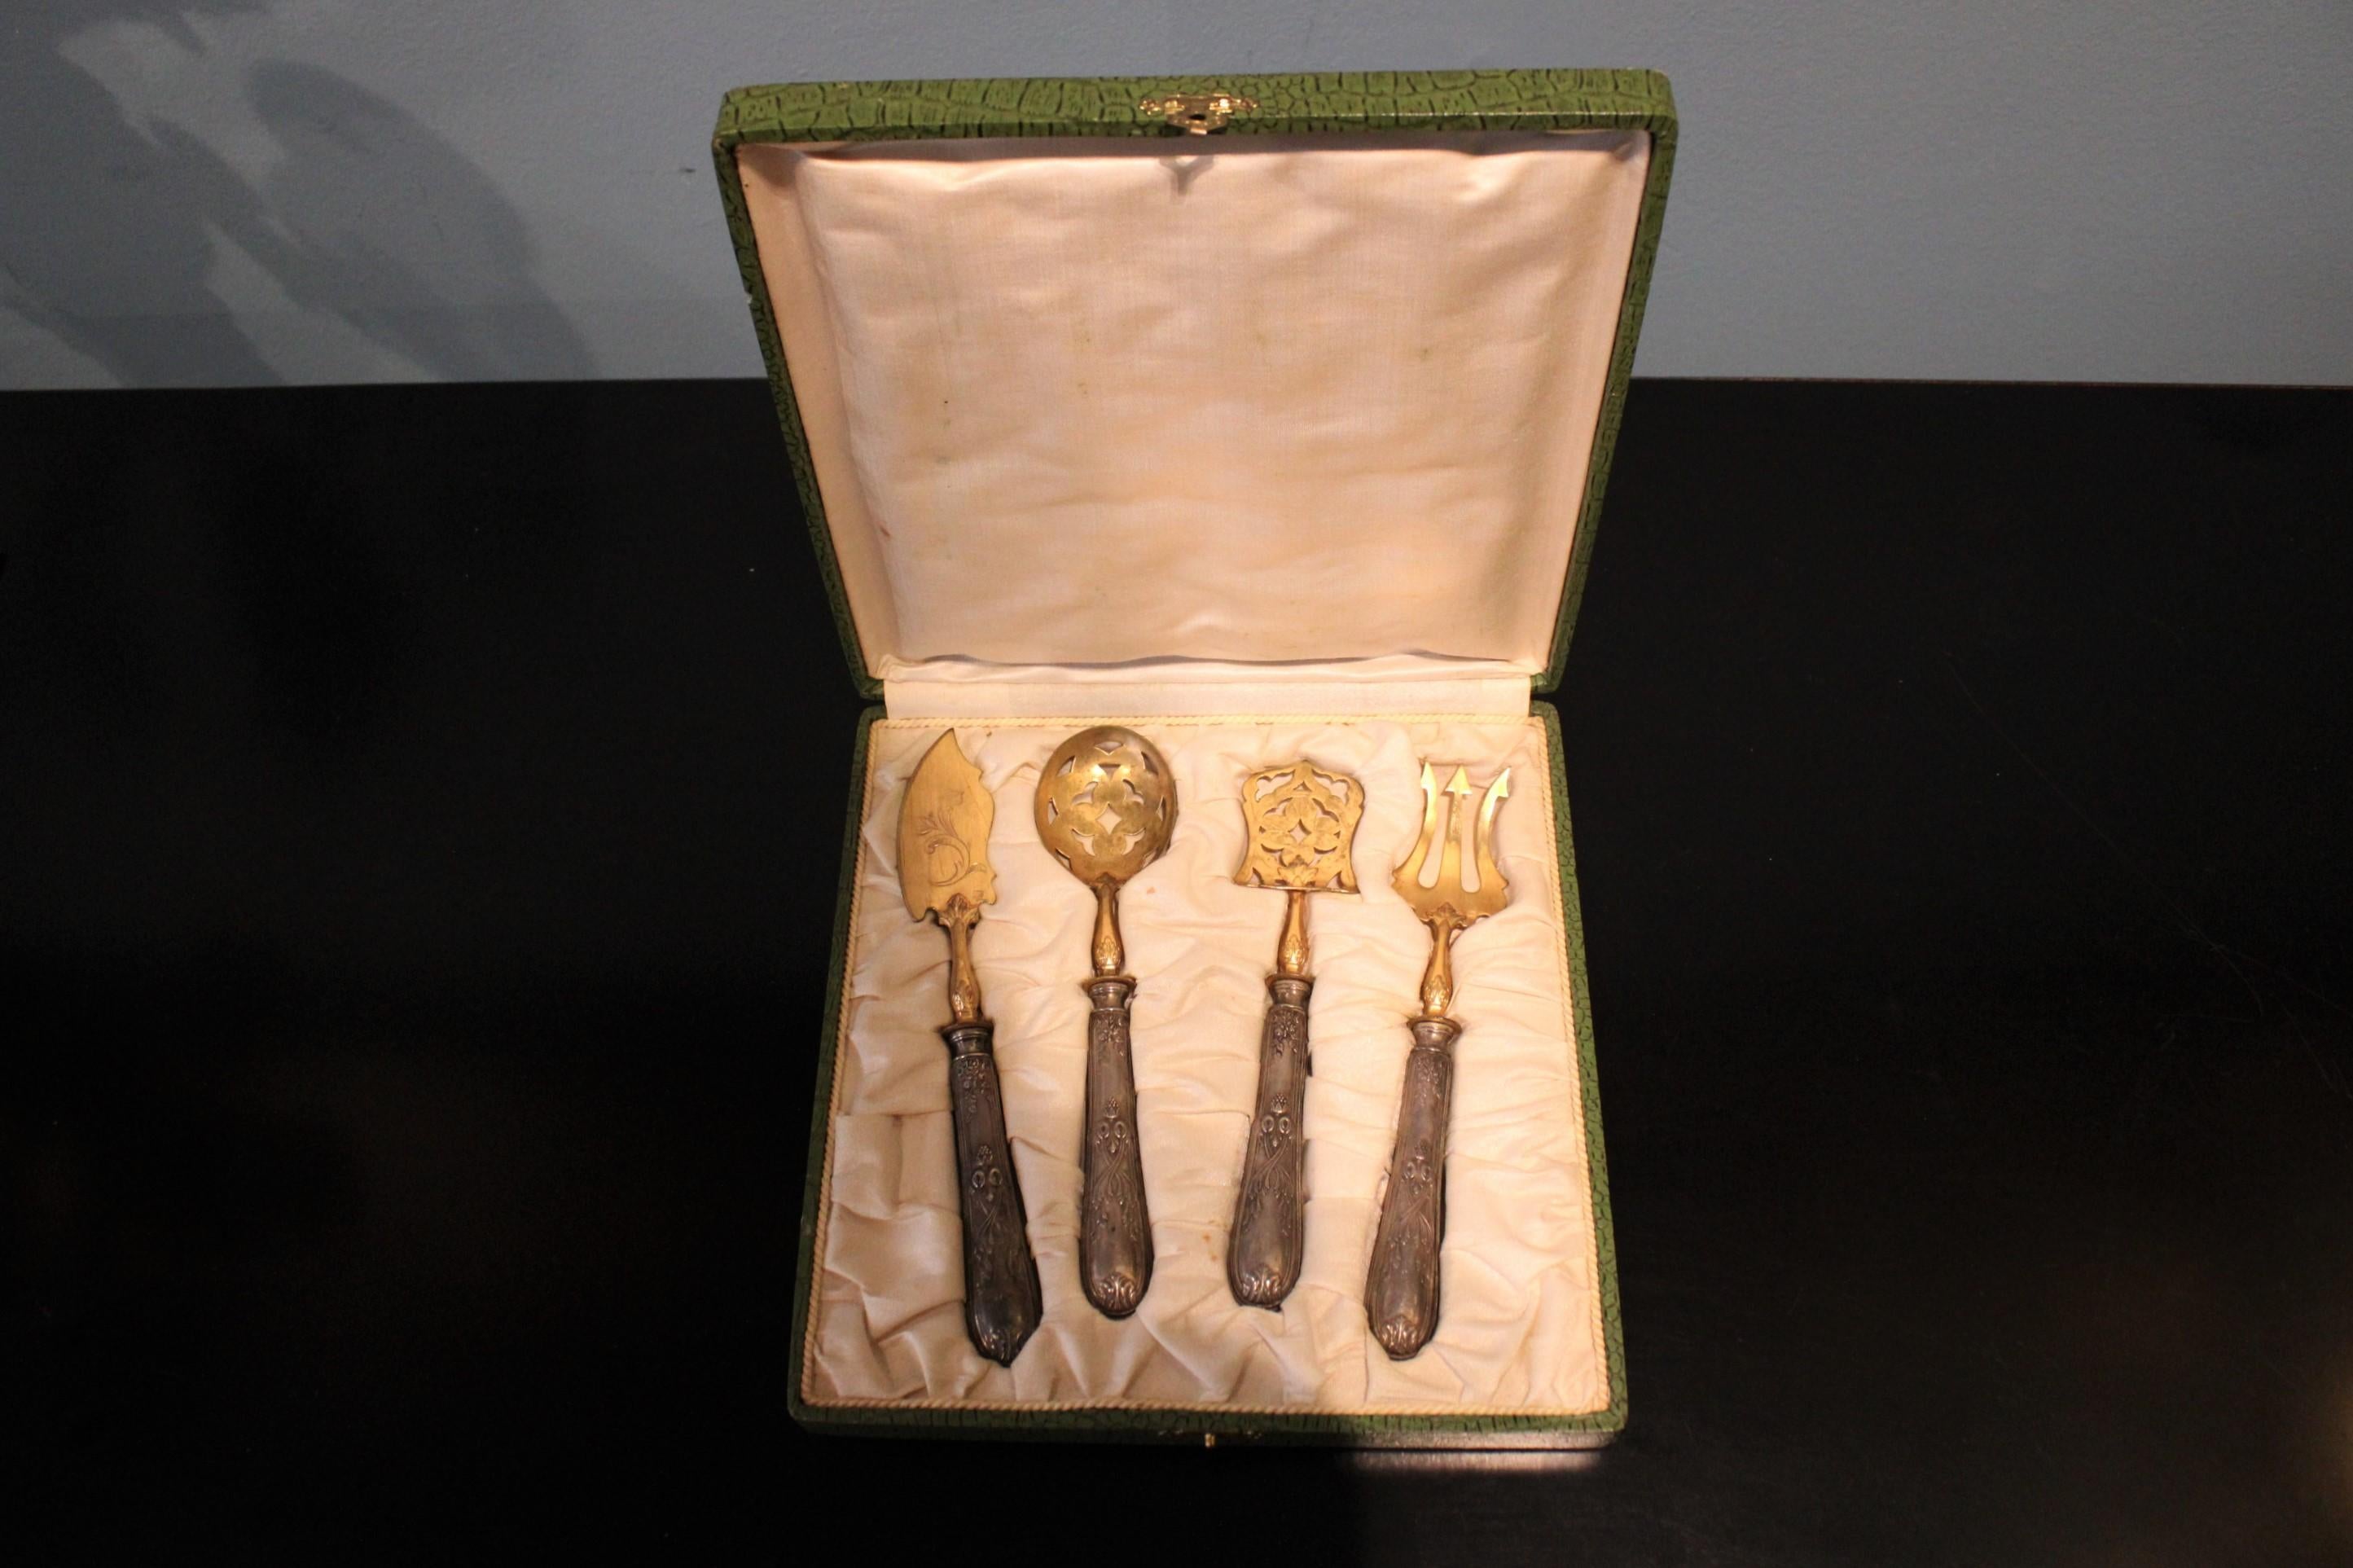 Set of 4 filled silver and gold metal cutlery, in a box.

Box dimensions : 20 x 21 x 3.5 cm 
Cutlery dimensions : 18 x 3 x 1 cm.